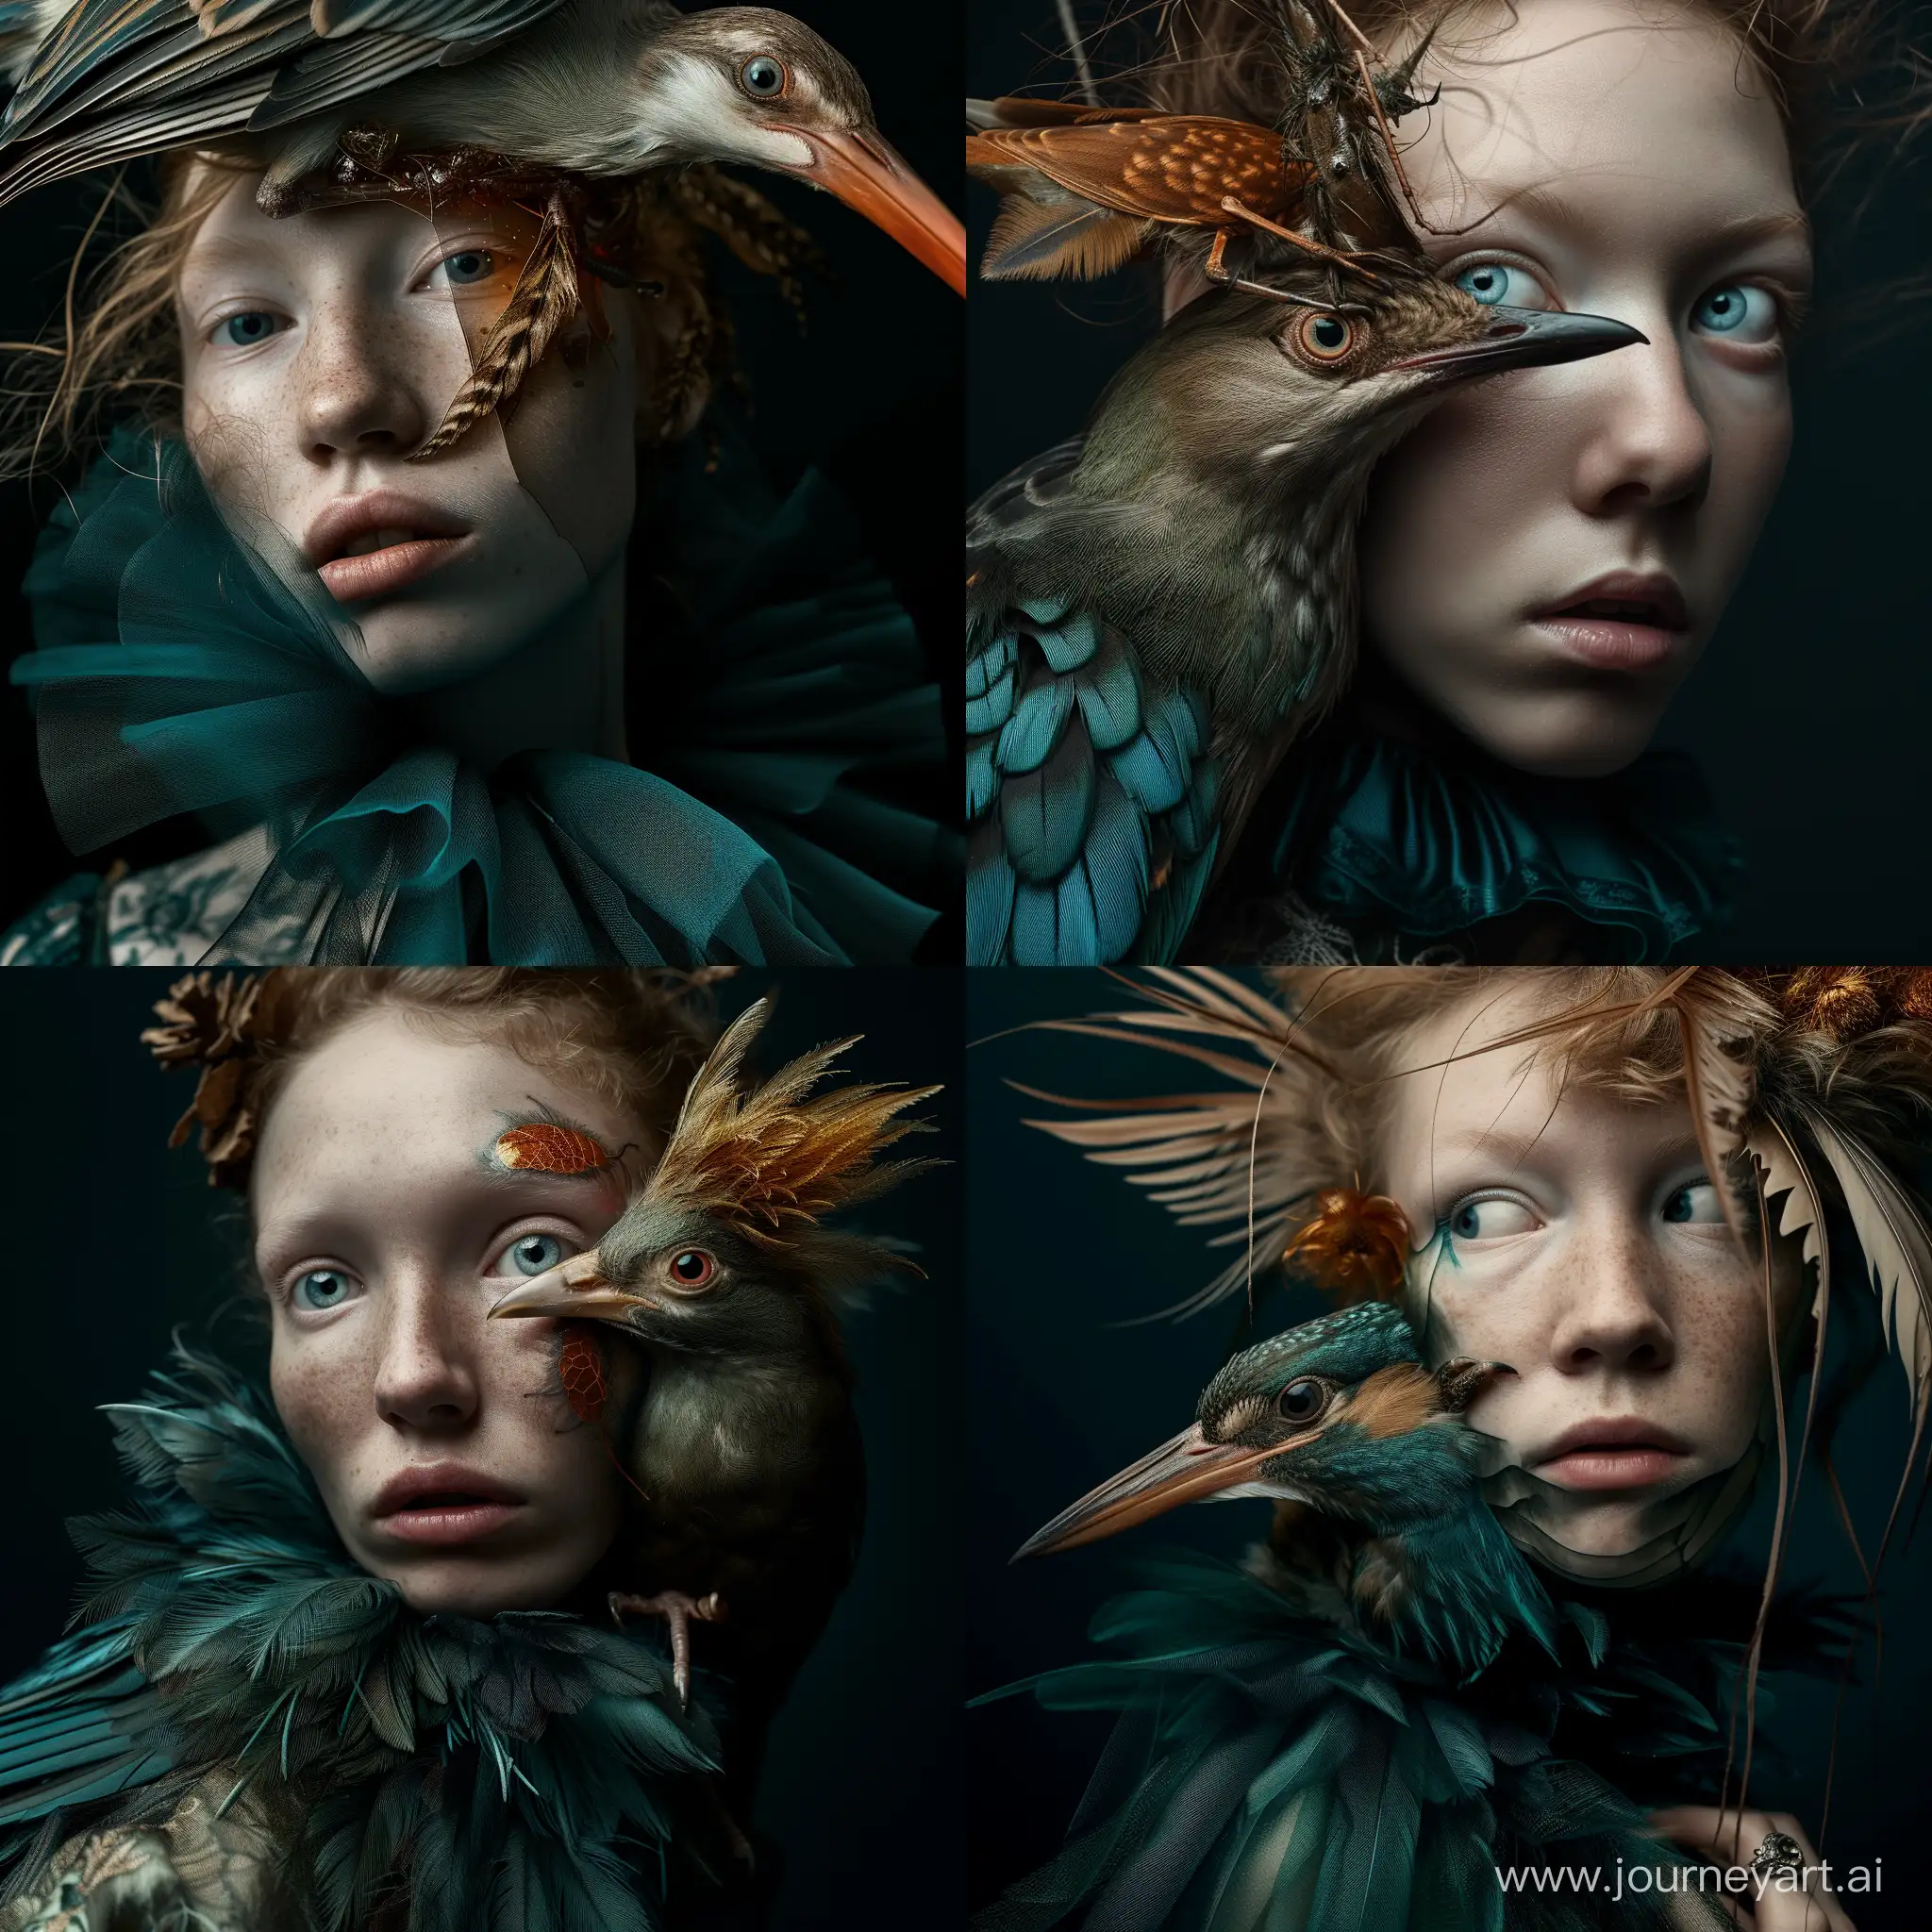 Surreal-Portrait-of-Woman-with-Bird-Eerily-Realistic-Metamorphosis-in-Teal-and-Amber